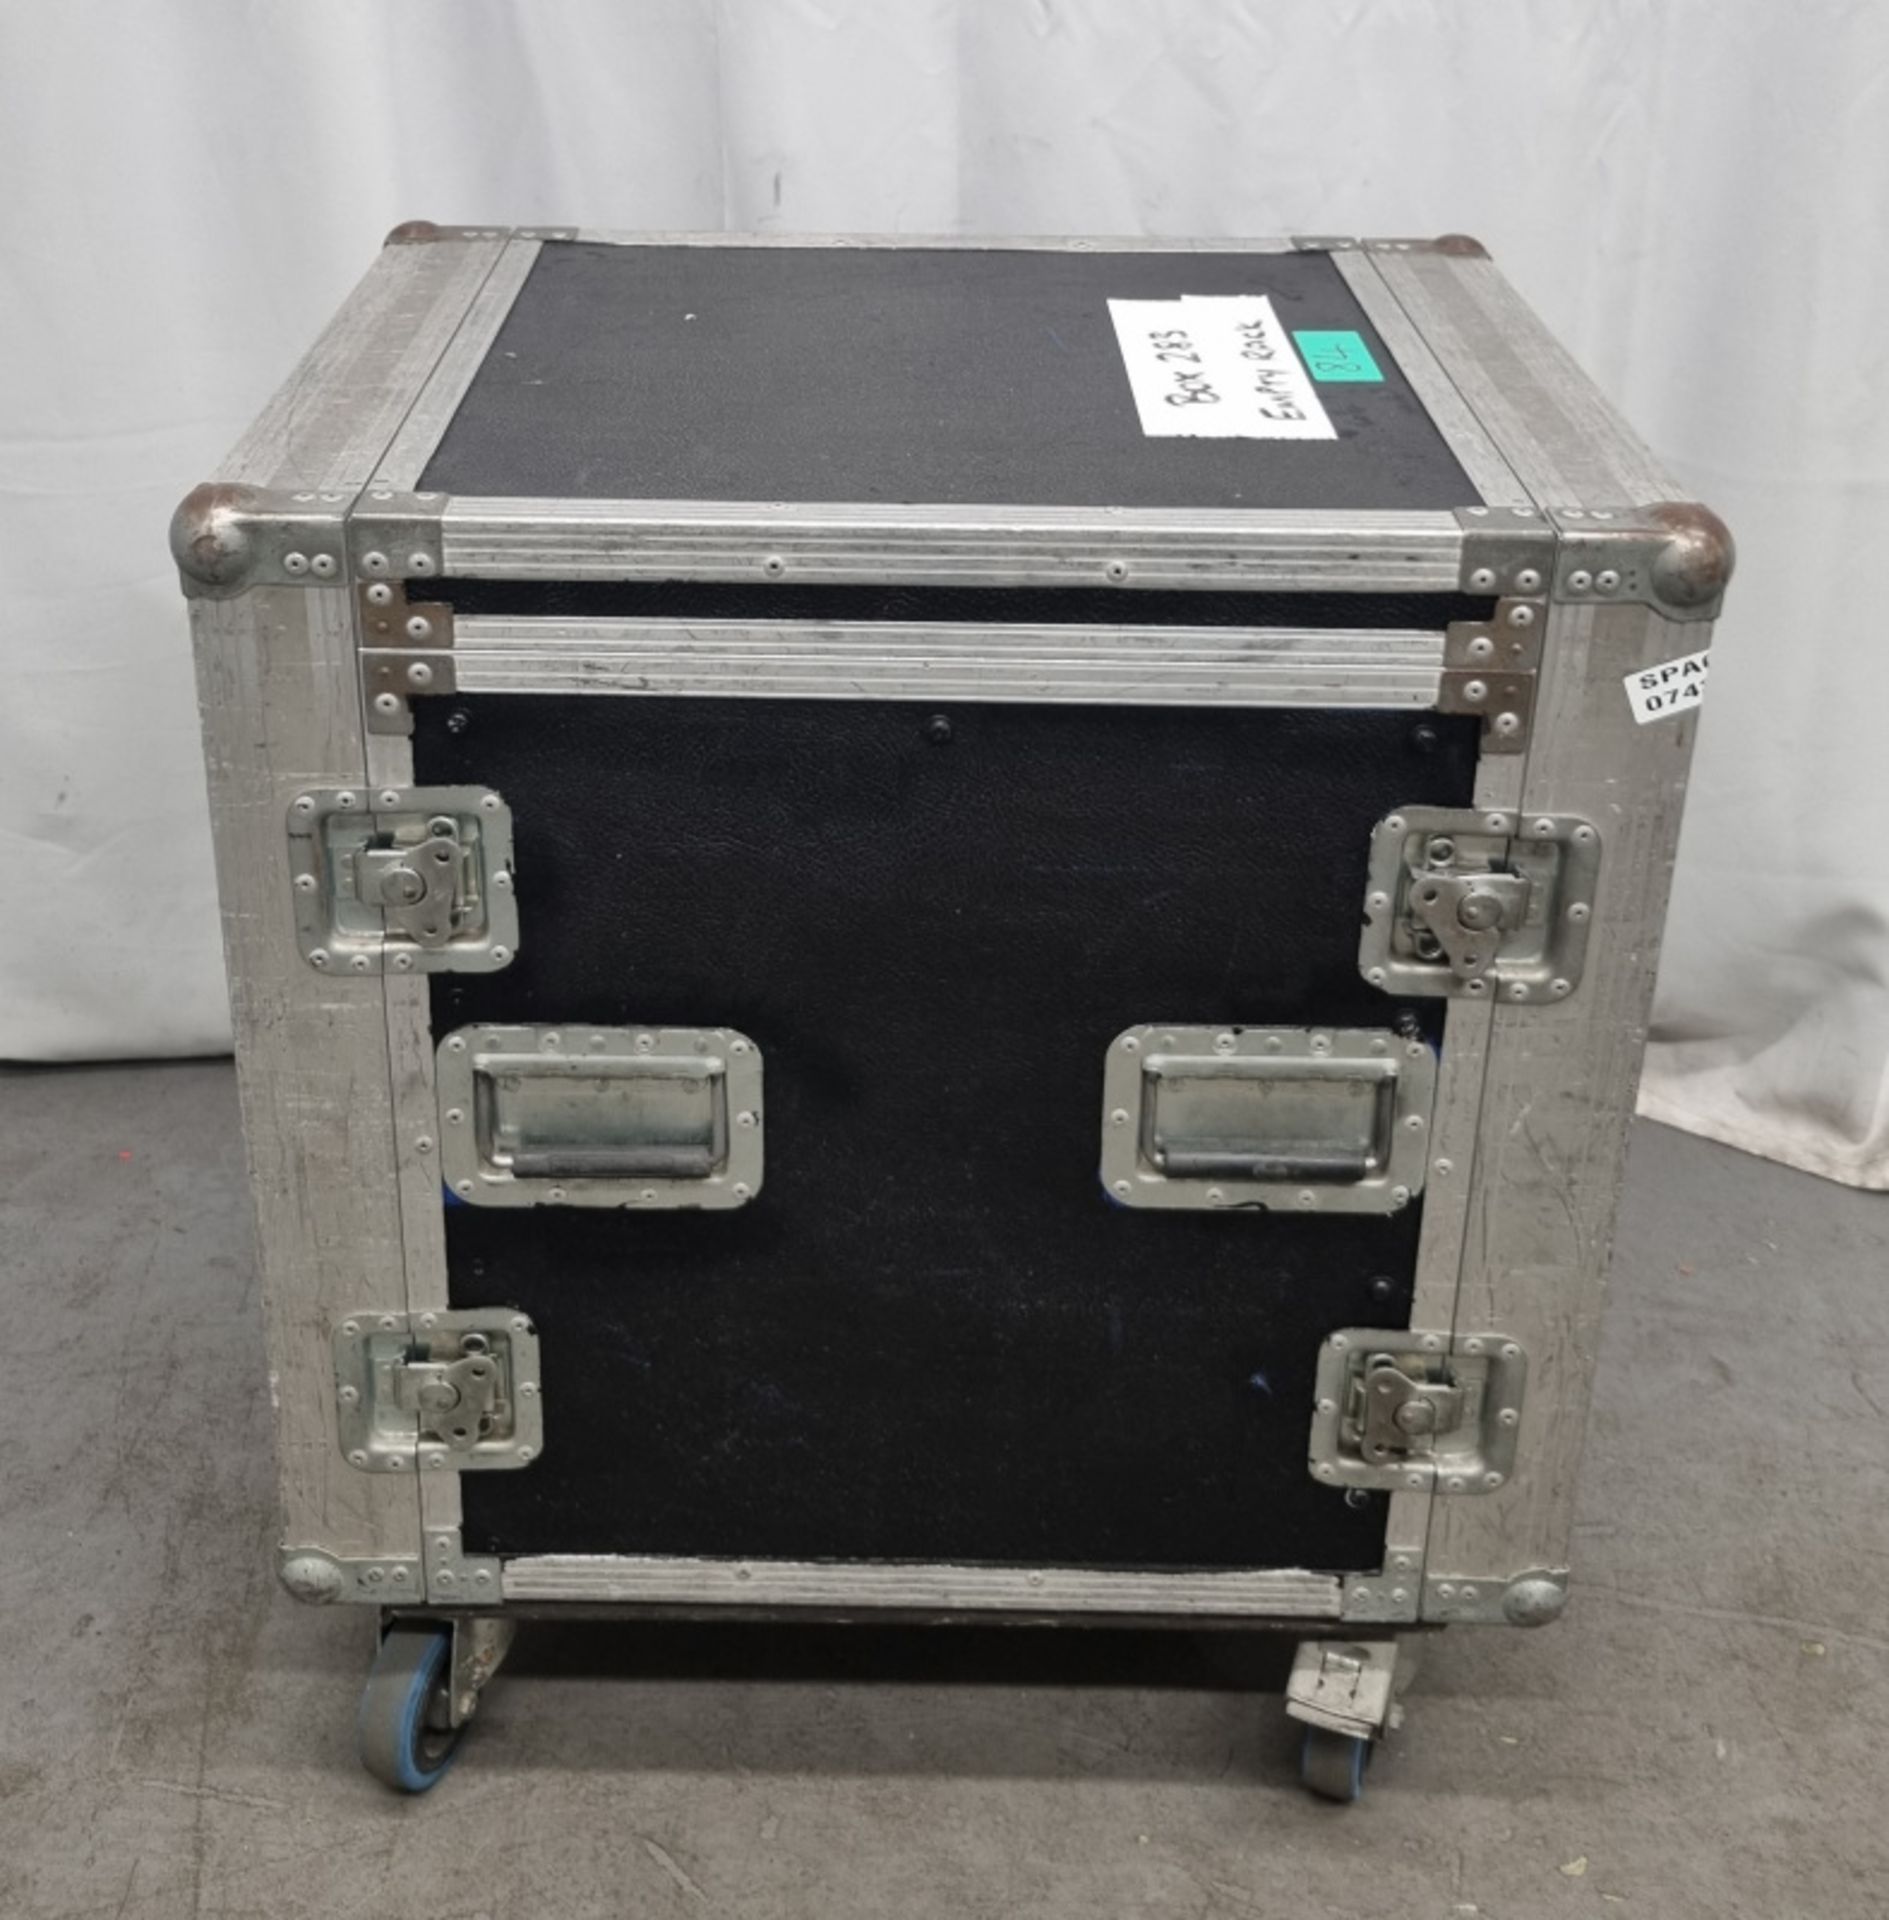 Empty Wheeled Flight case with internal rack - Dimensions L51.5 x W59 x H78 (including wheels) - Image 3 of 5